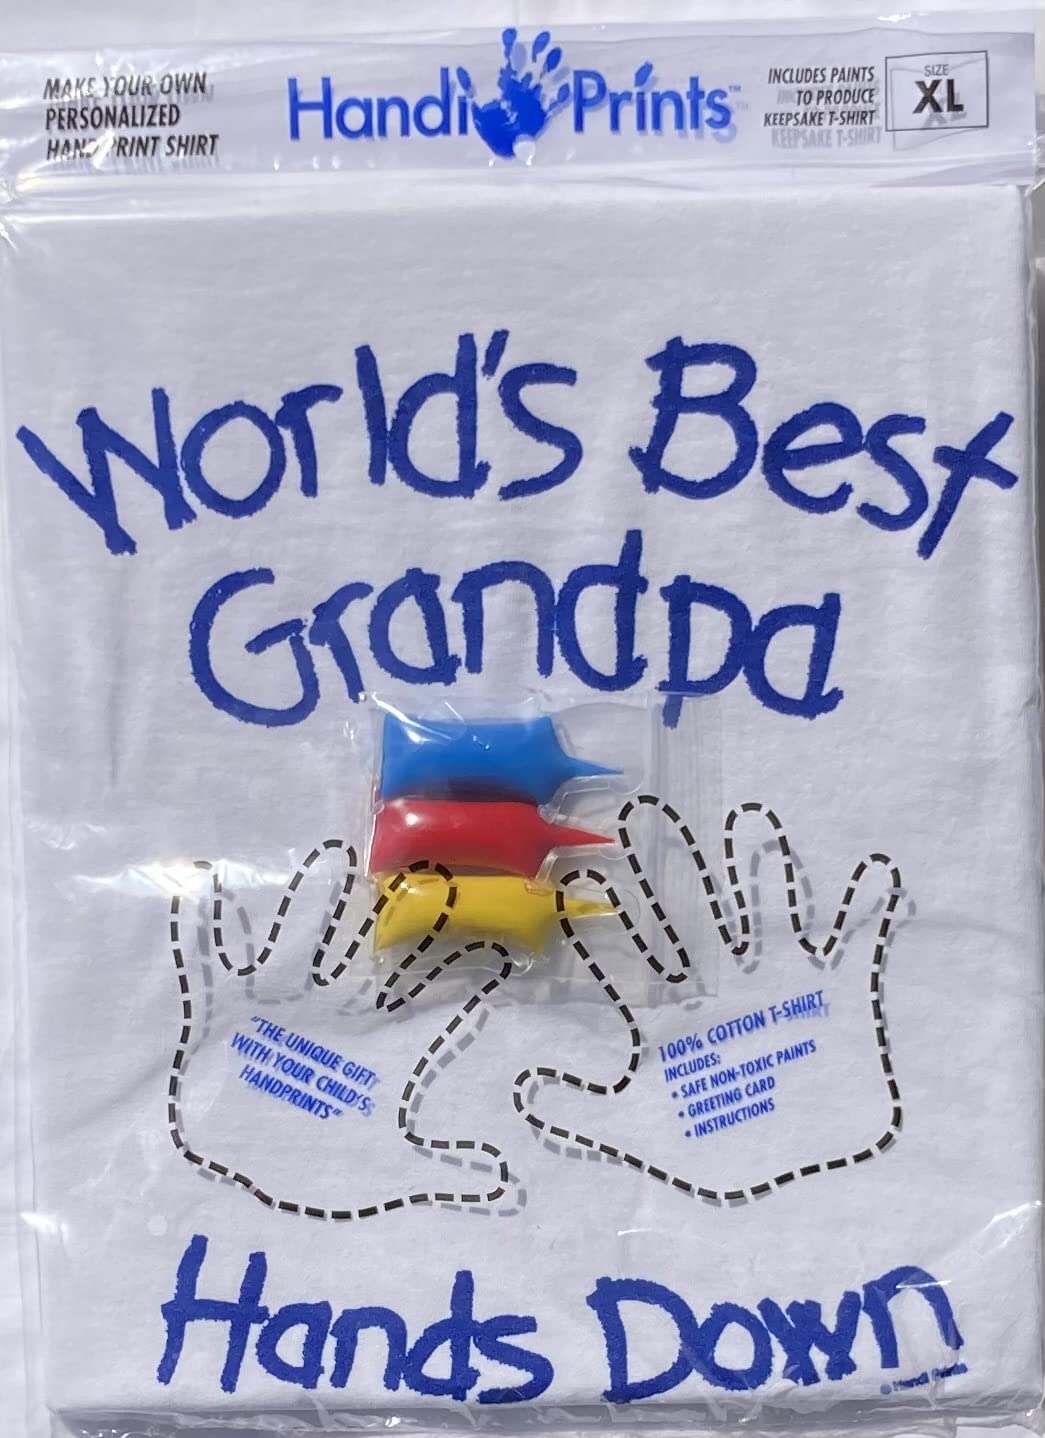 HandiPrints World's Best Grandpa T-Shirt with Paint Kit - Hand Prints for Family (Large, White)